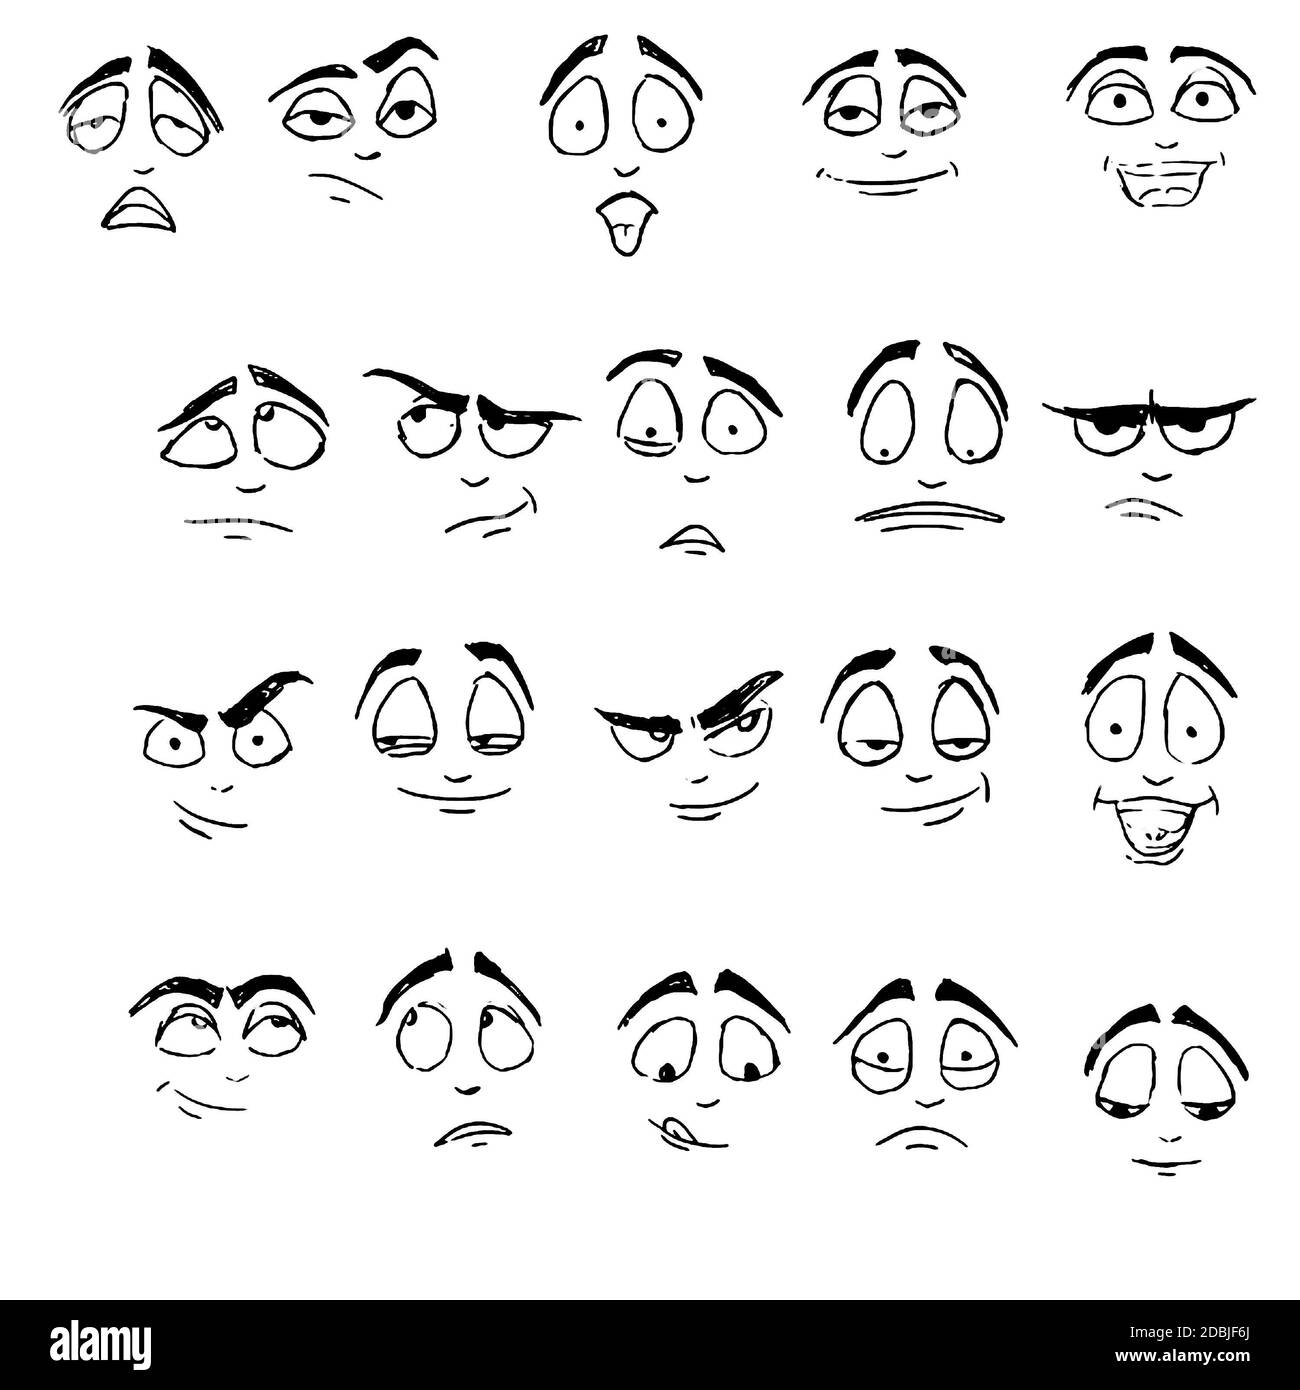 Drawing black and white emoji, emoticons. Different emotions on the faces  Stock Photo - Alamy